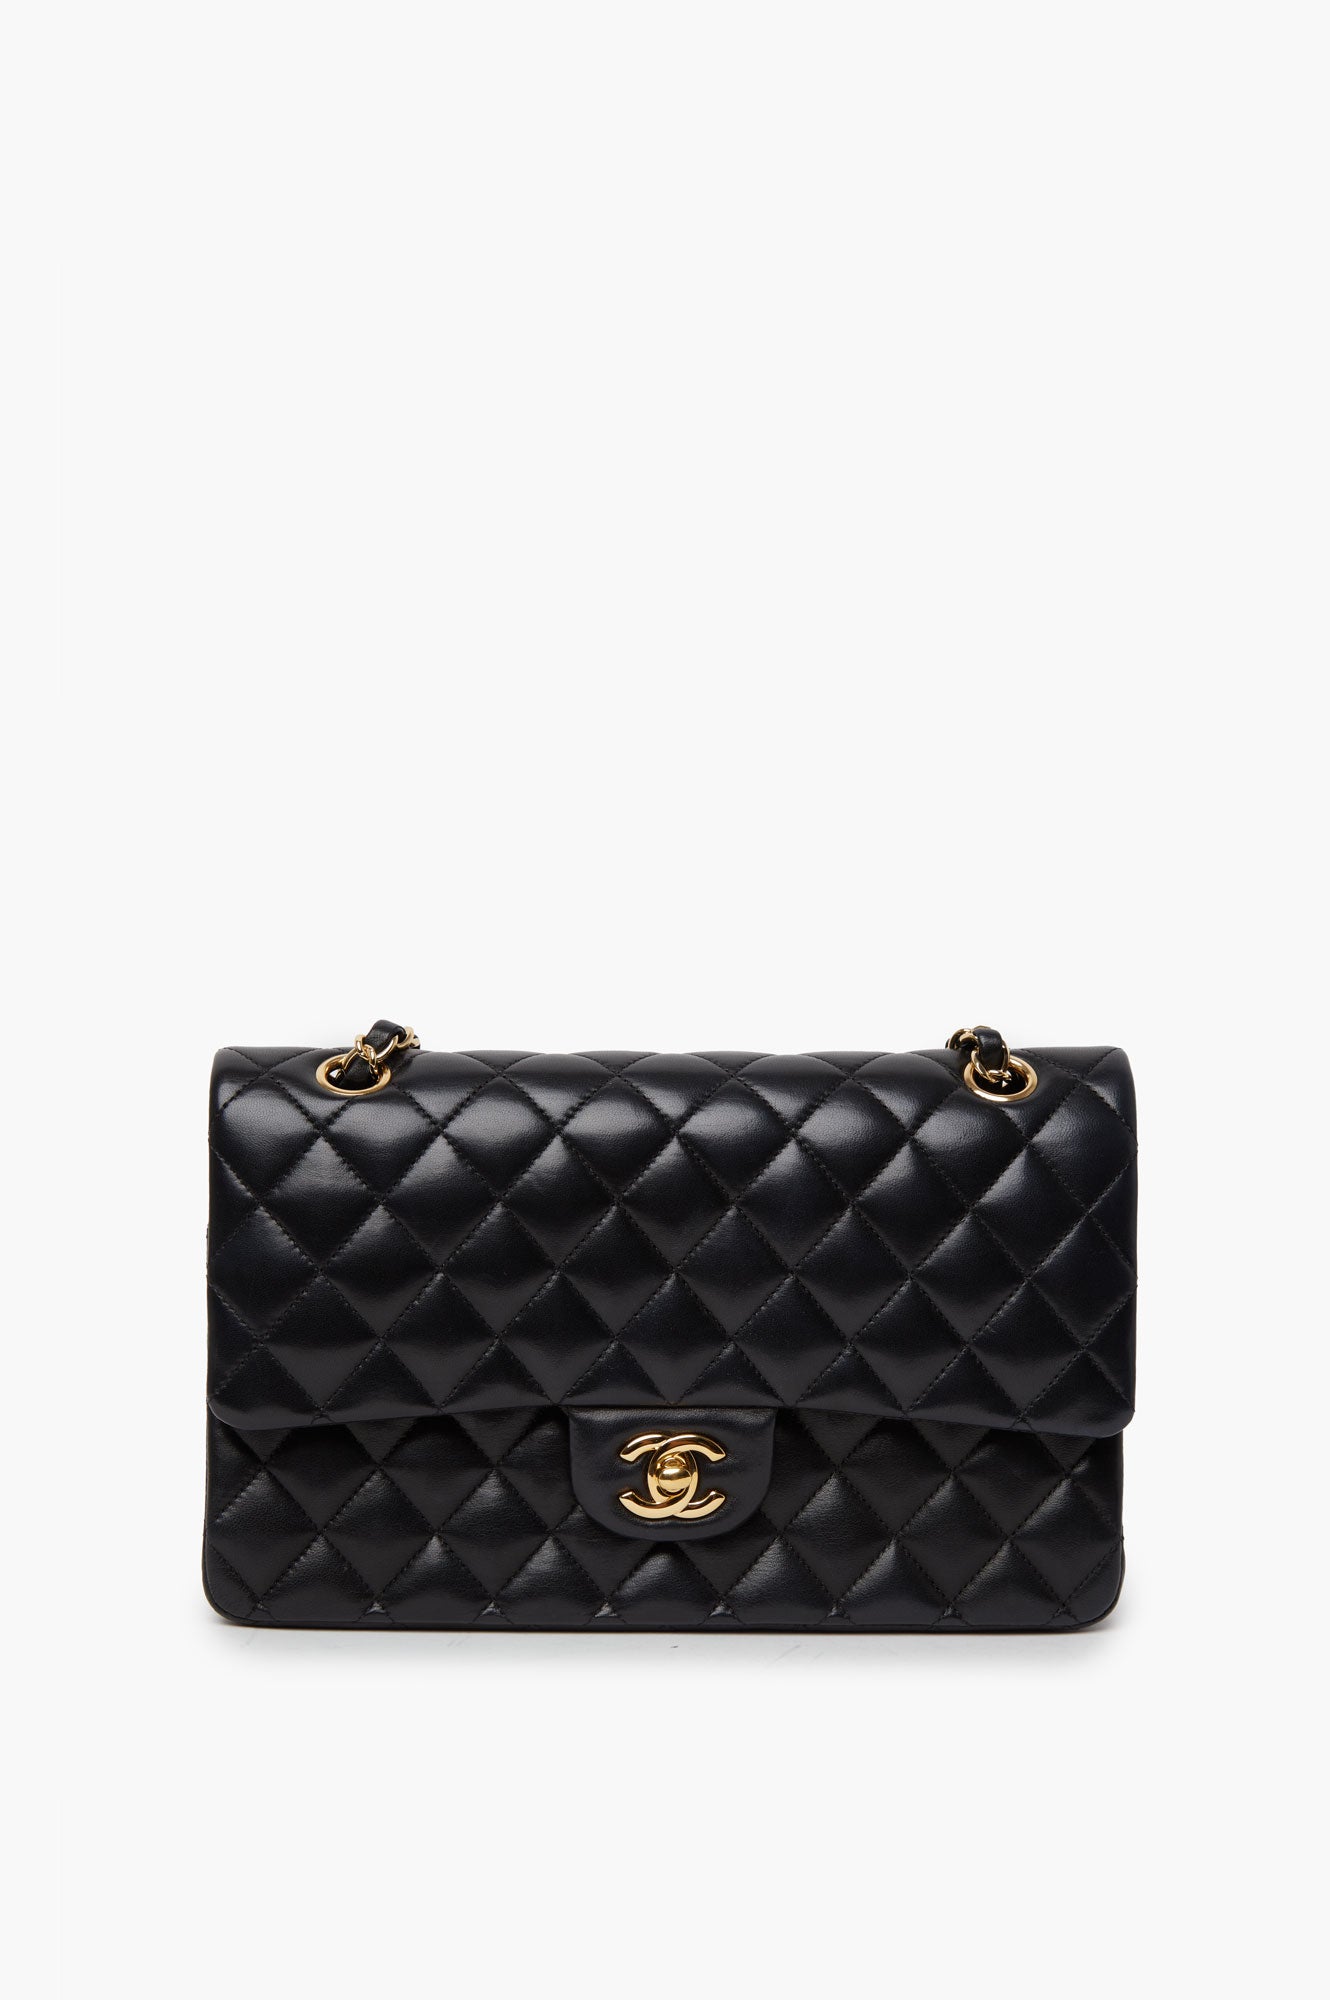 Chanel Black Lambskin Medium Classic Double Flap Bag – Once More